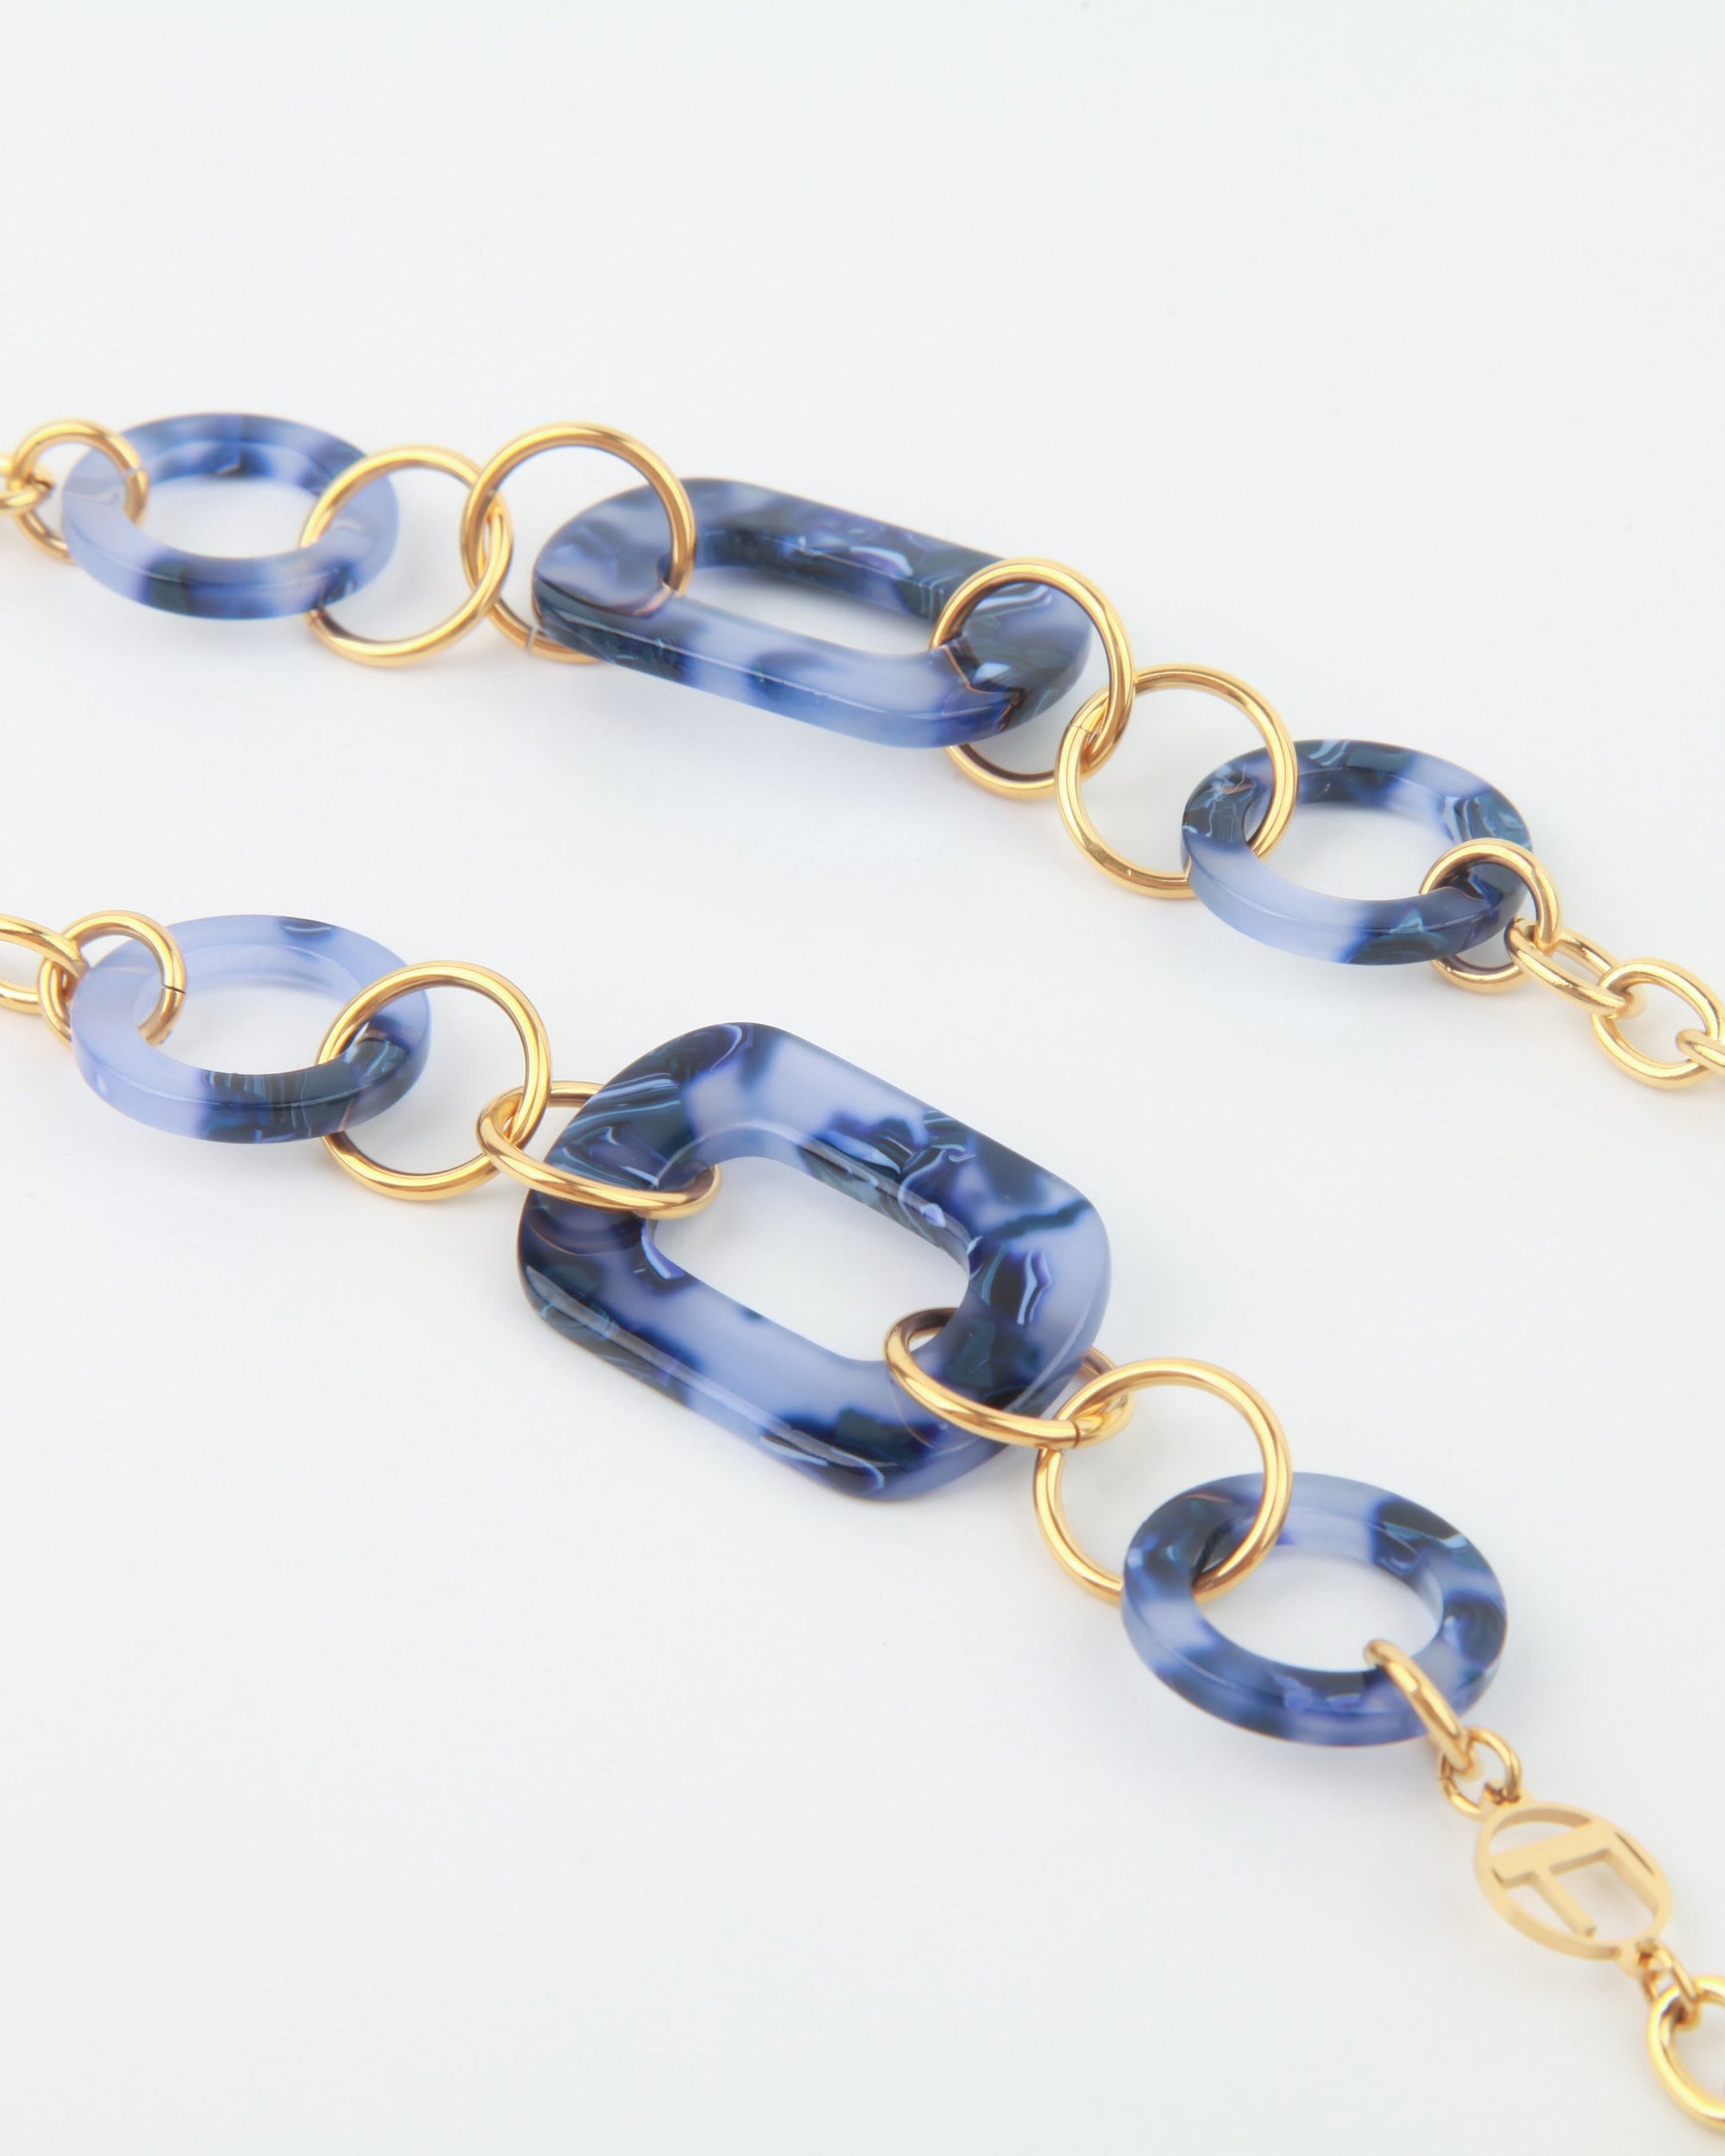 A close-up of a fashionable bracelet featuring 18-karat gold-plated links and marbled blue resin rings. The design alternates between circular and rectangular resin pieces, connected by bright gold loops, creating a modern For Art&#39;s Sake® NYC Glasses Chain-style accessory.